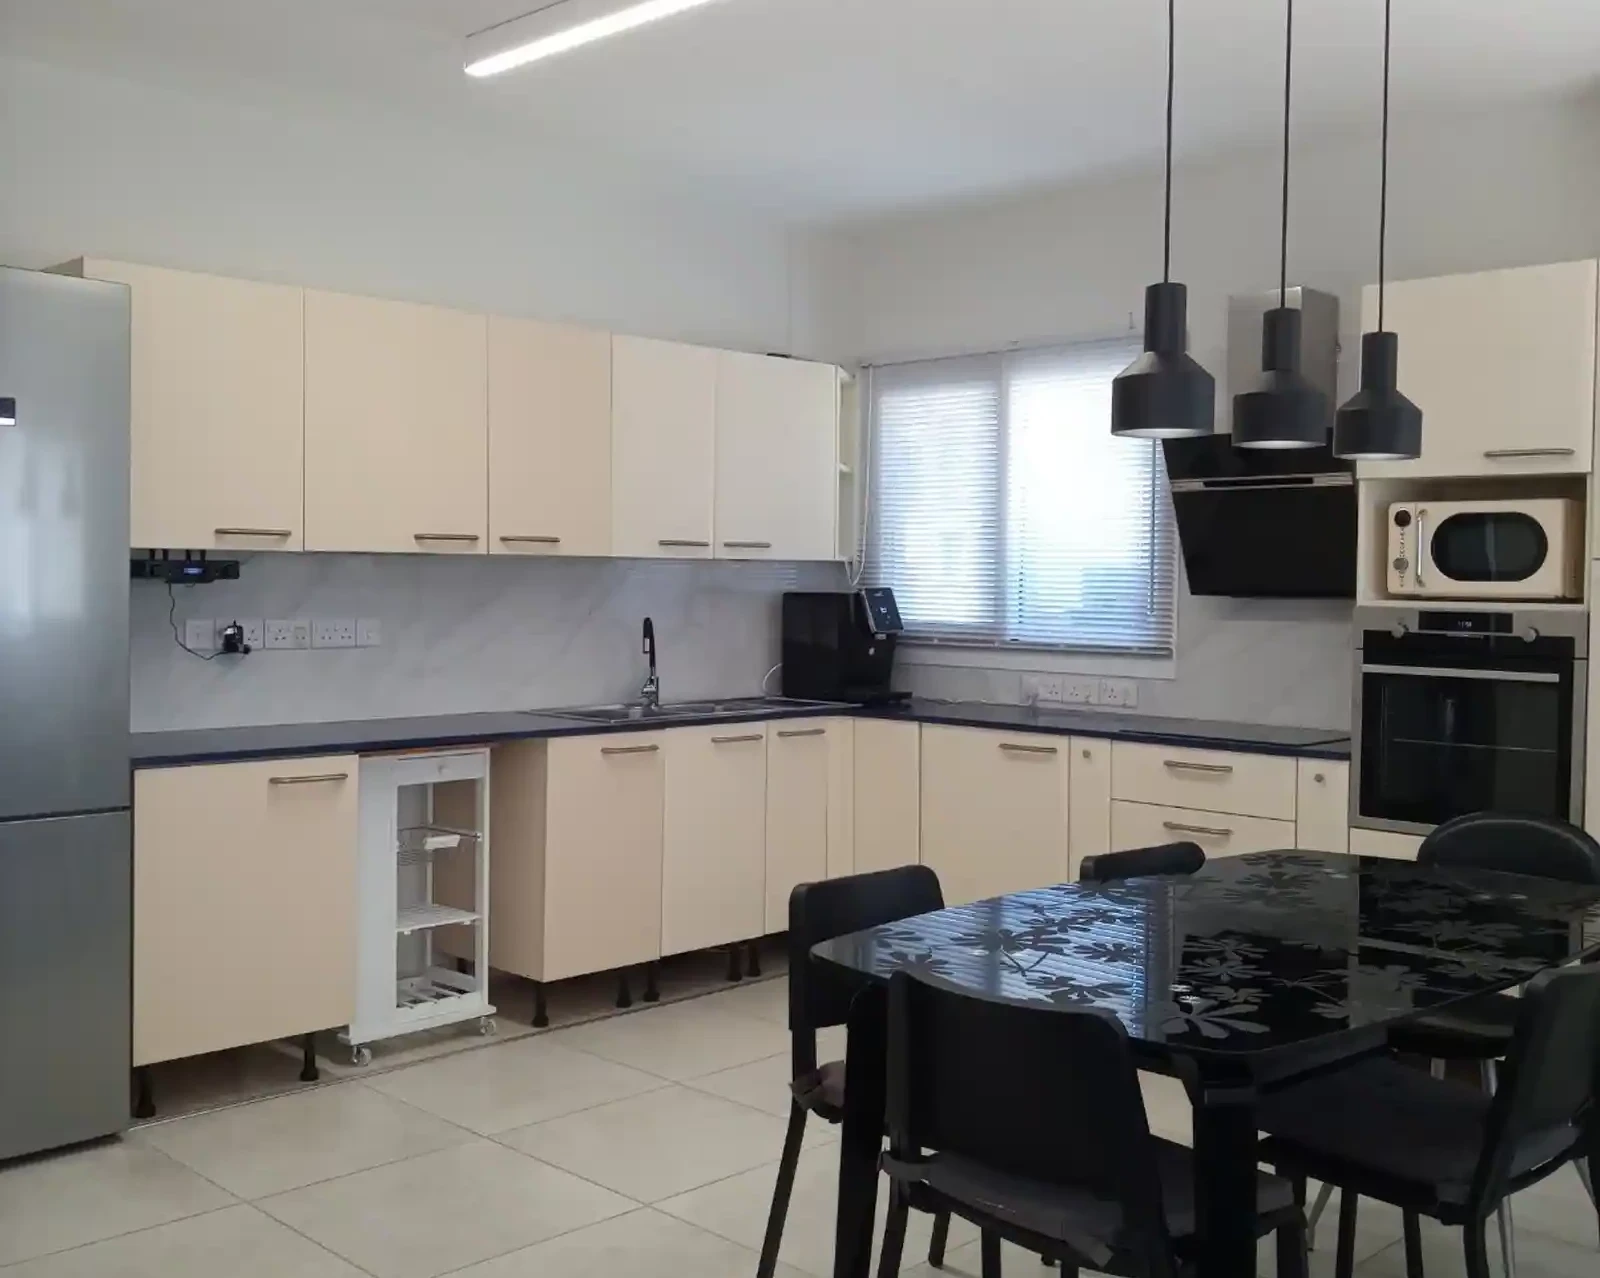 3-bedroom apartment fоr sаle €207.000, image 1